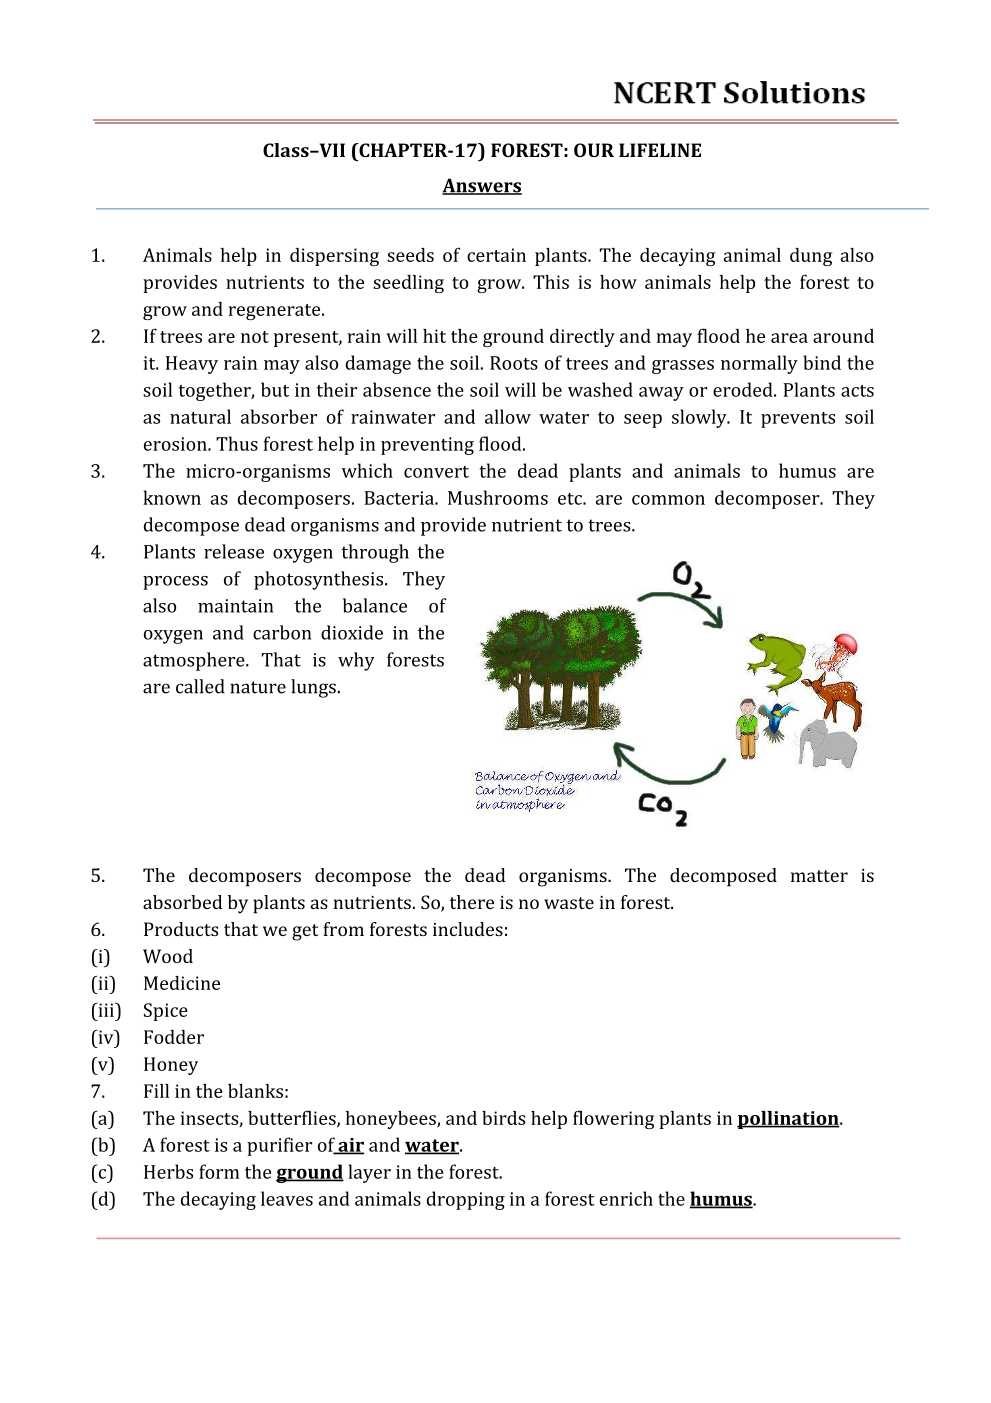 NCERT Solutions For Class 7 science Chapter 17 Forests – Our Lifeline